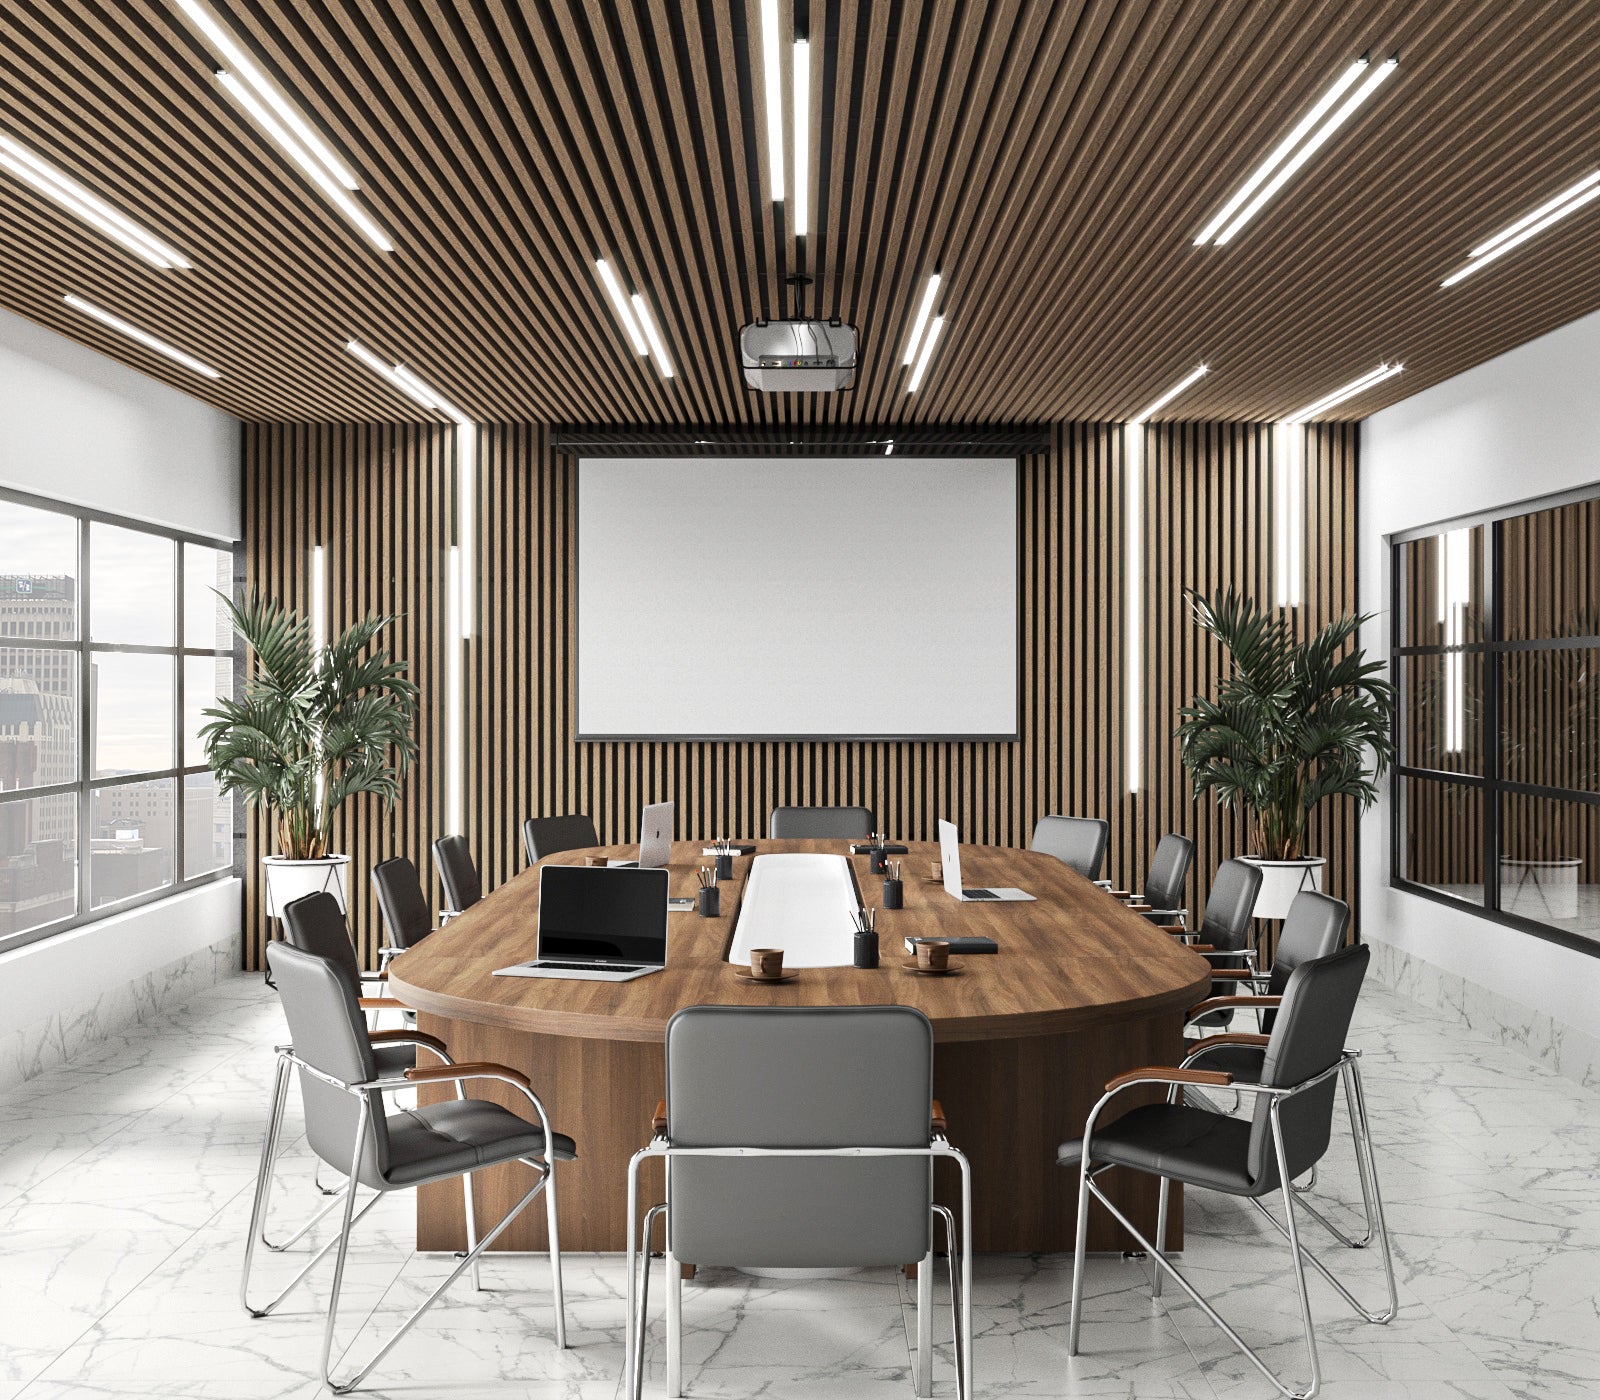 Custom Wood Ceiling with LED Lighting: for your interior space